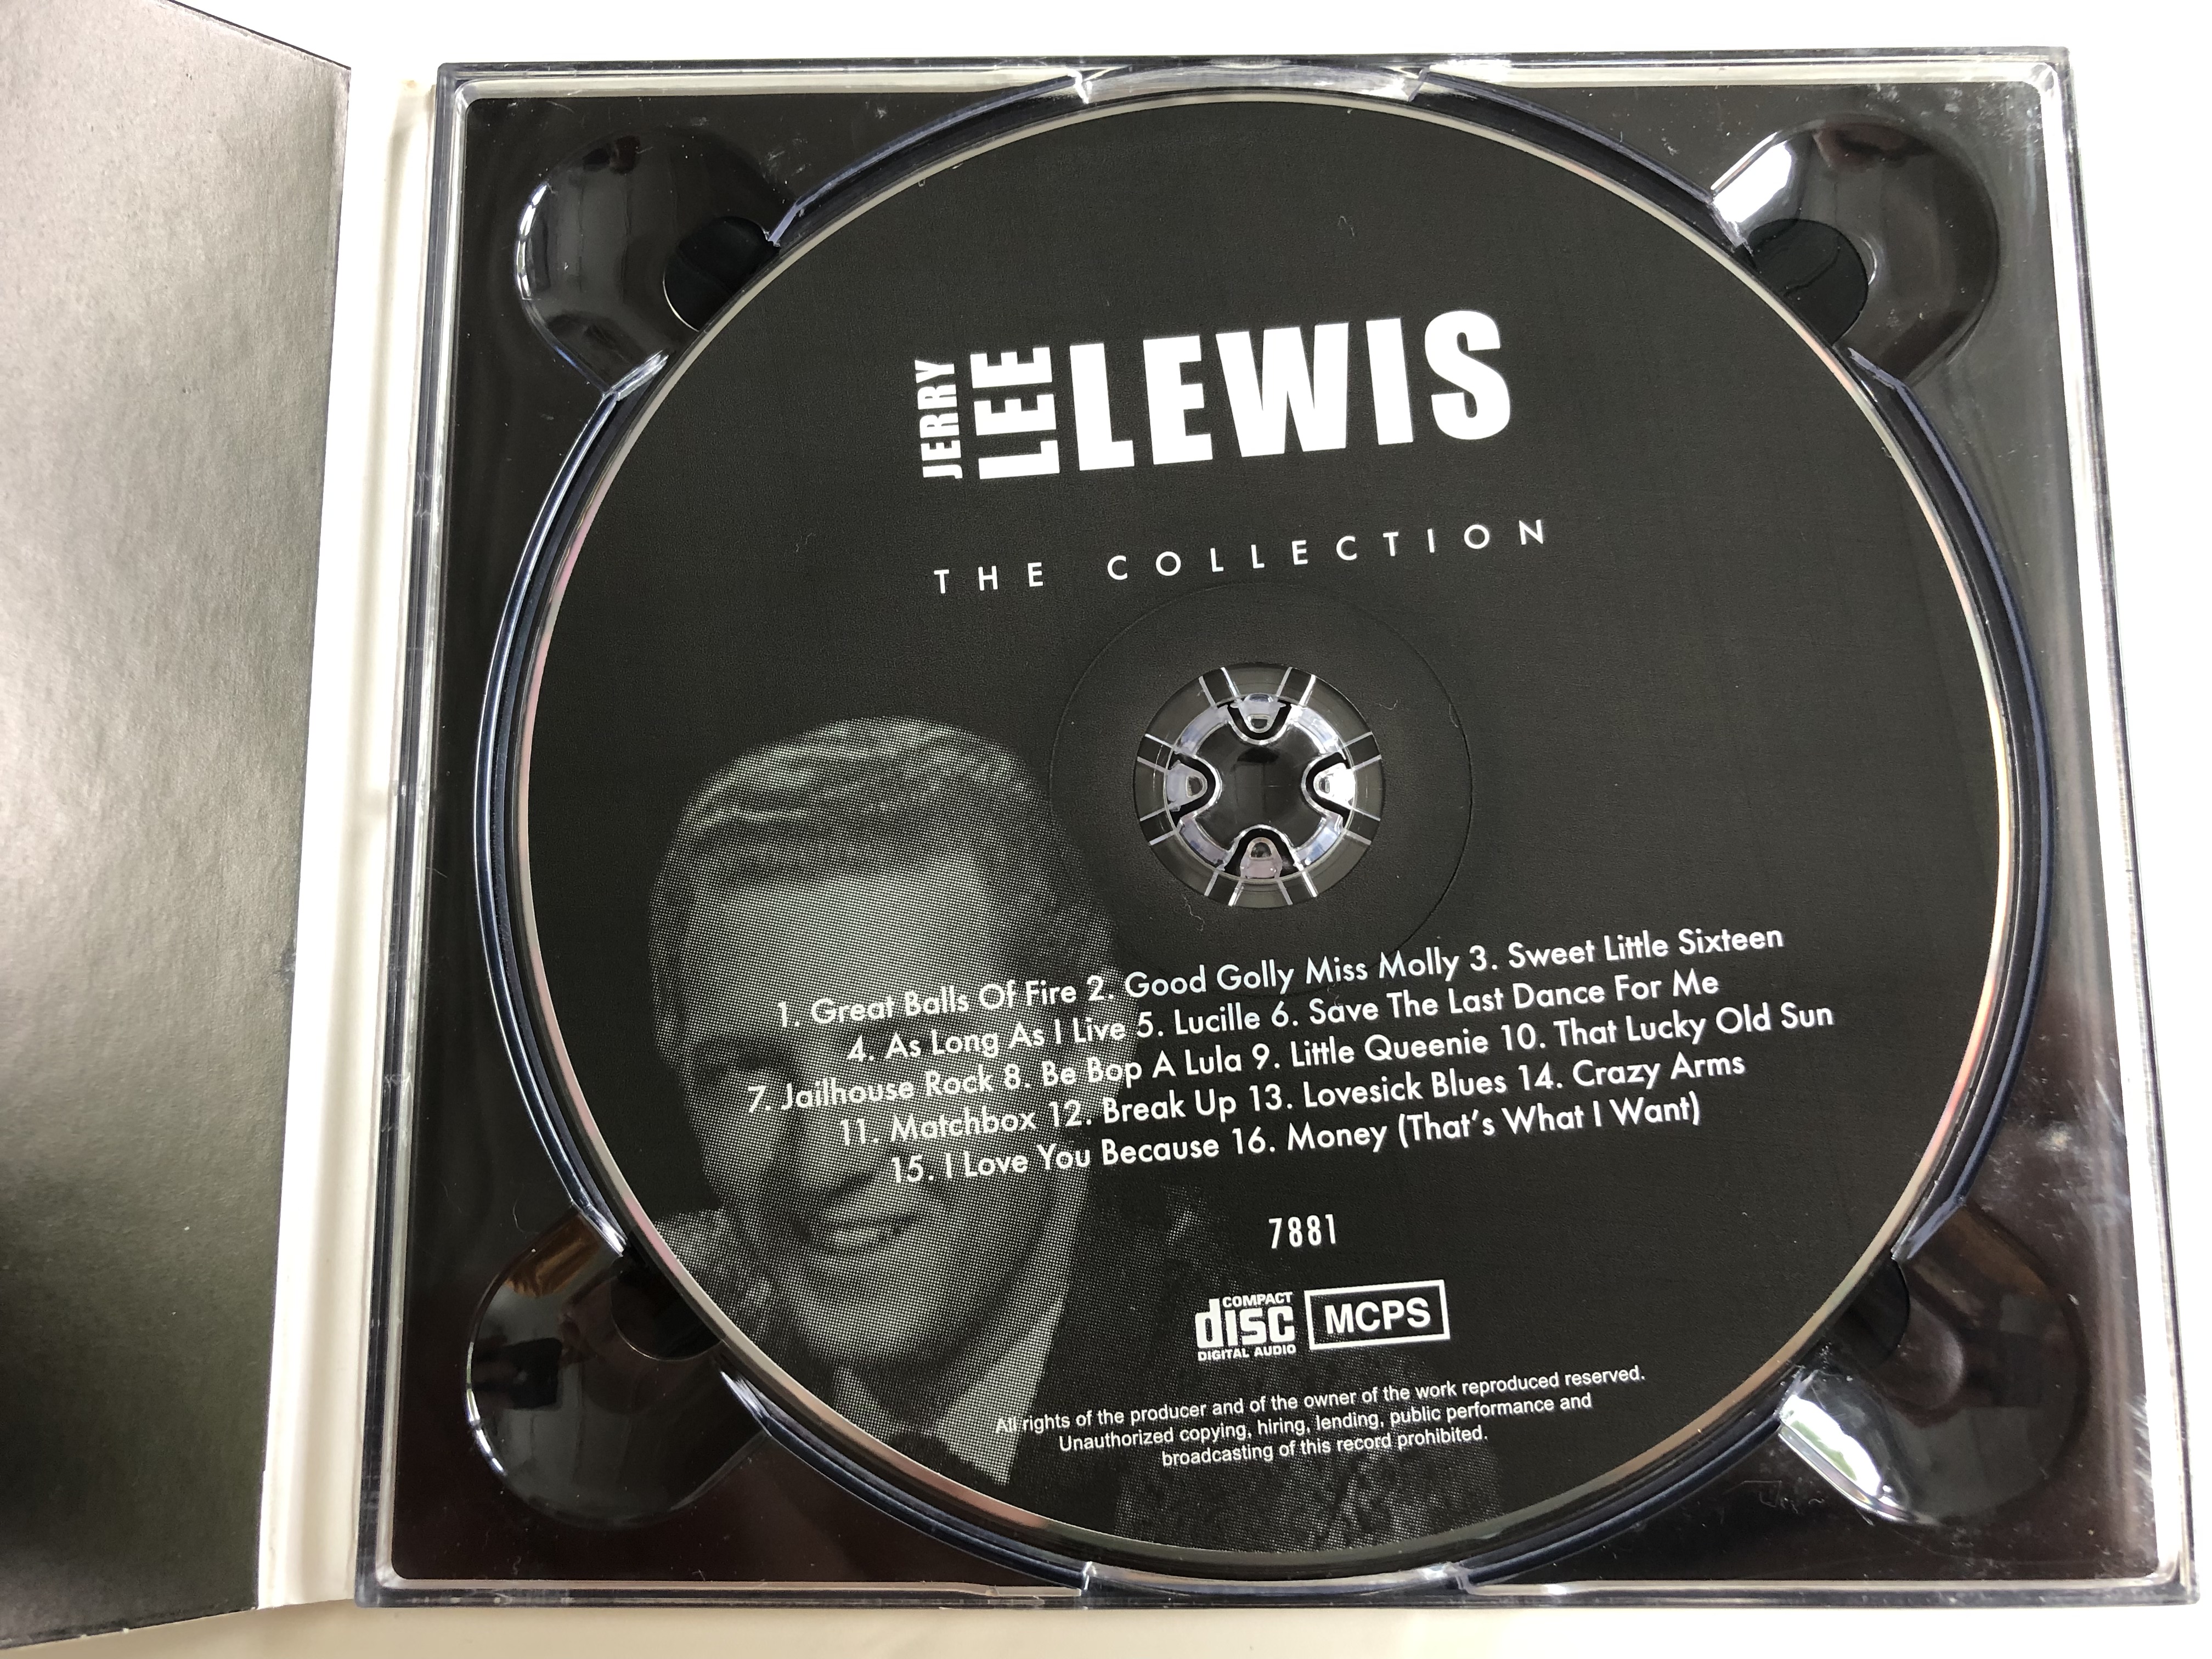 jerry-lee-lewis-the-collection-great-balls-of-fire-as-long-as-i-live-lucille-jailhouse-rock-matchbox-crazy-arms-audio-cd-music-mania-7881-2-.jpg